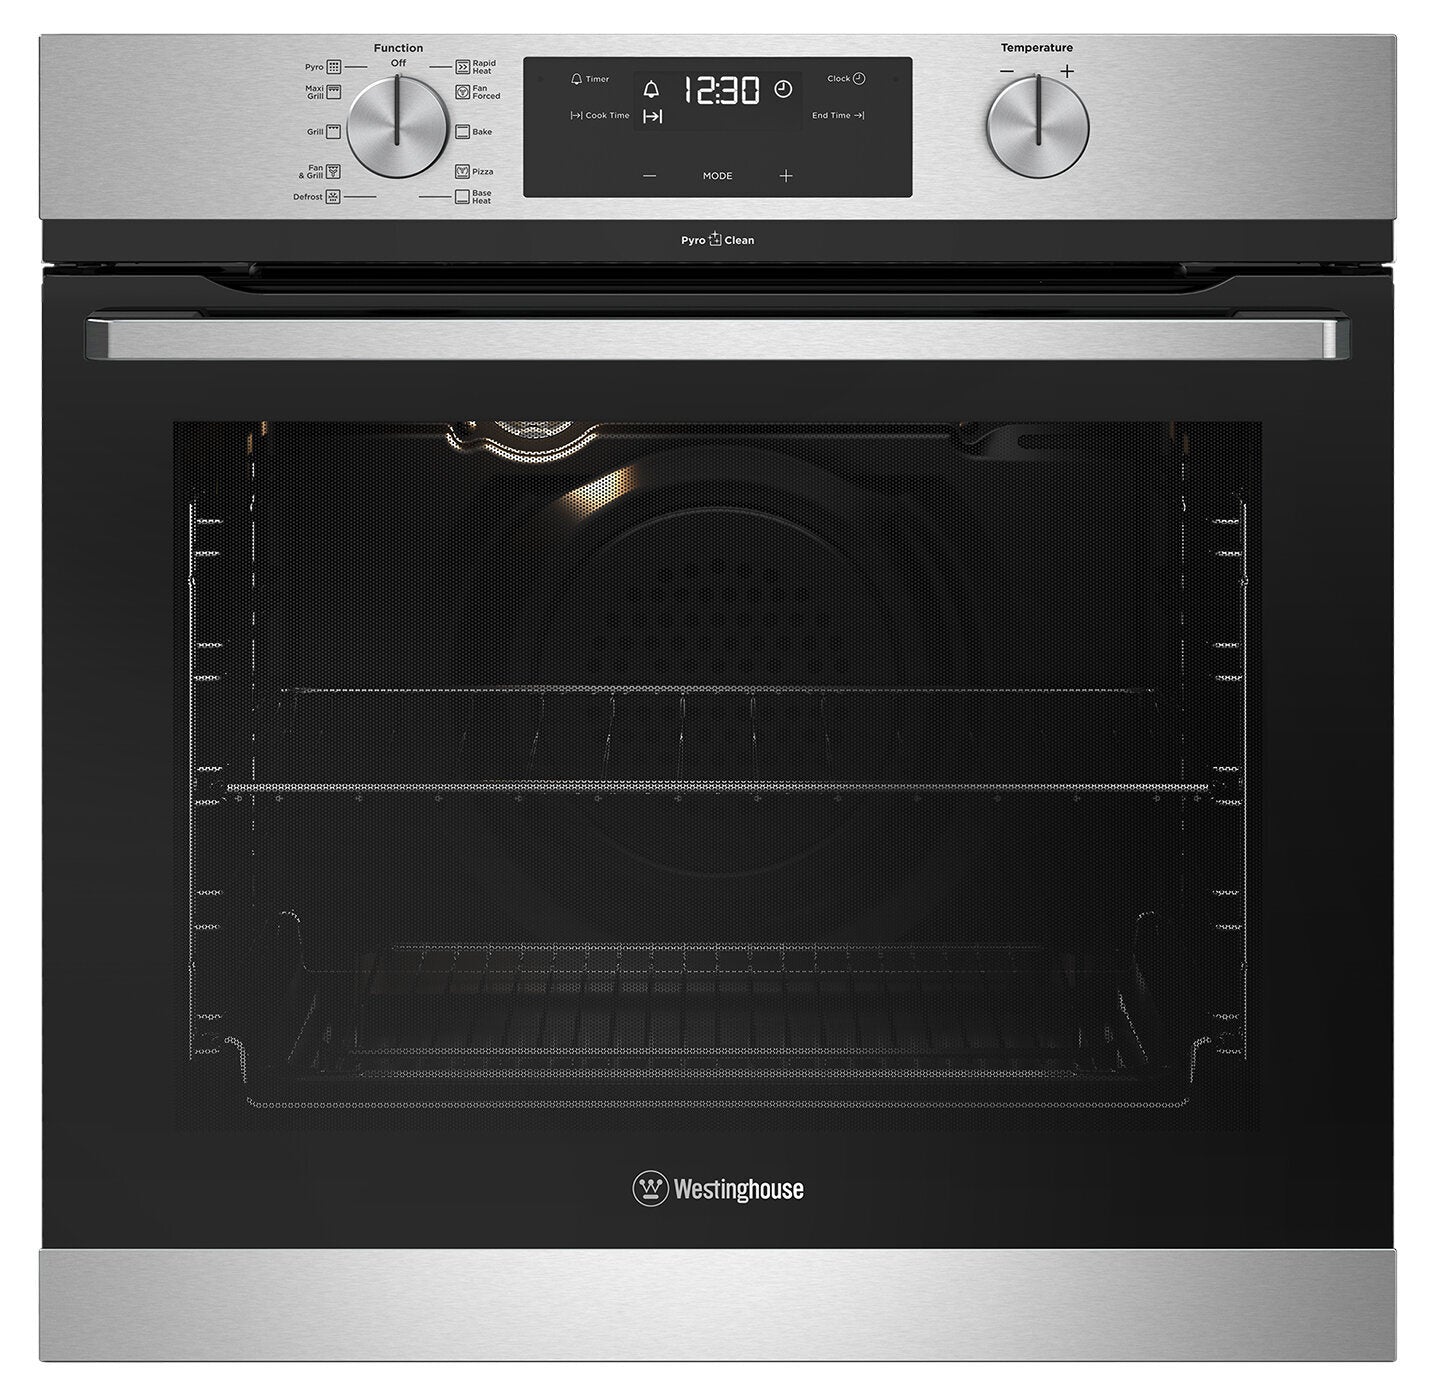 Westinghouse 60cm Stainless Steel Pyrolytic Built-In Oven Model WVEP615SC